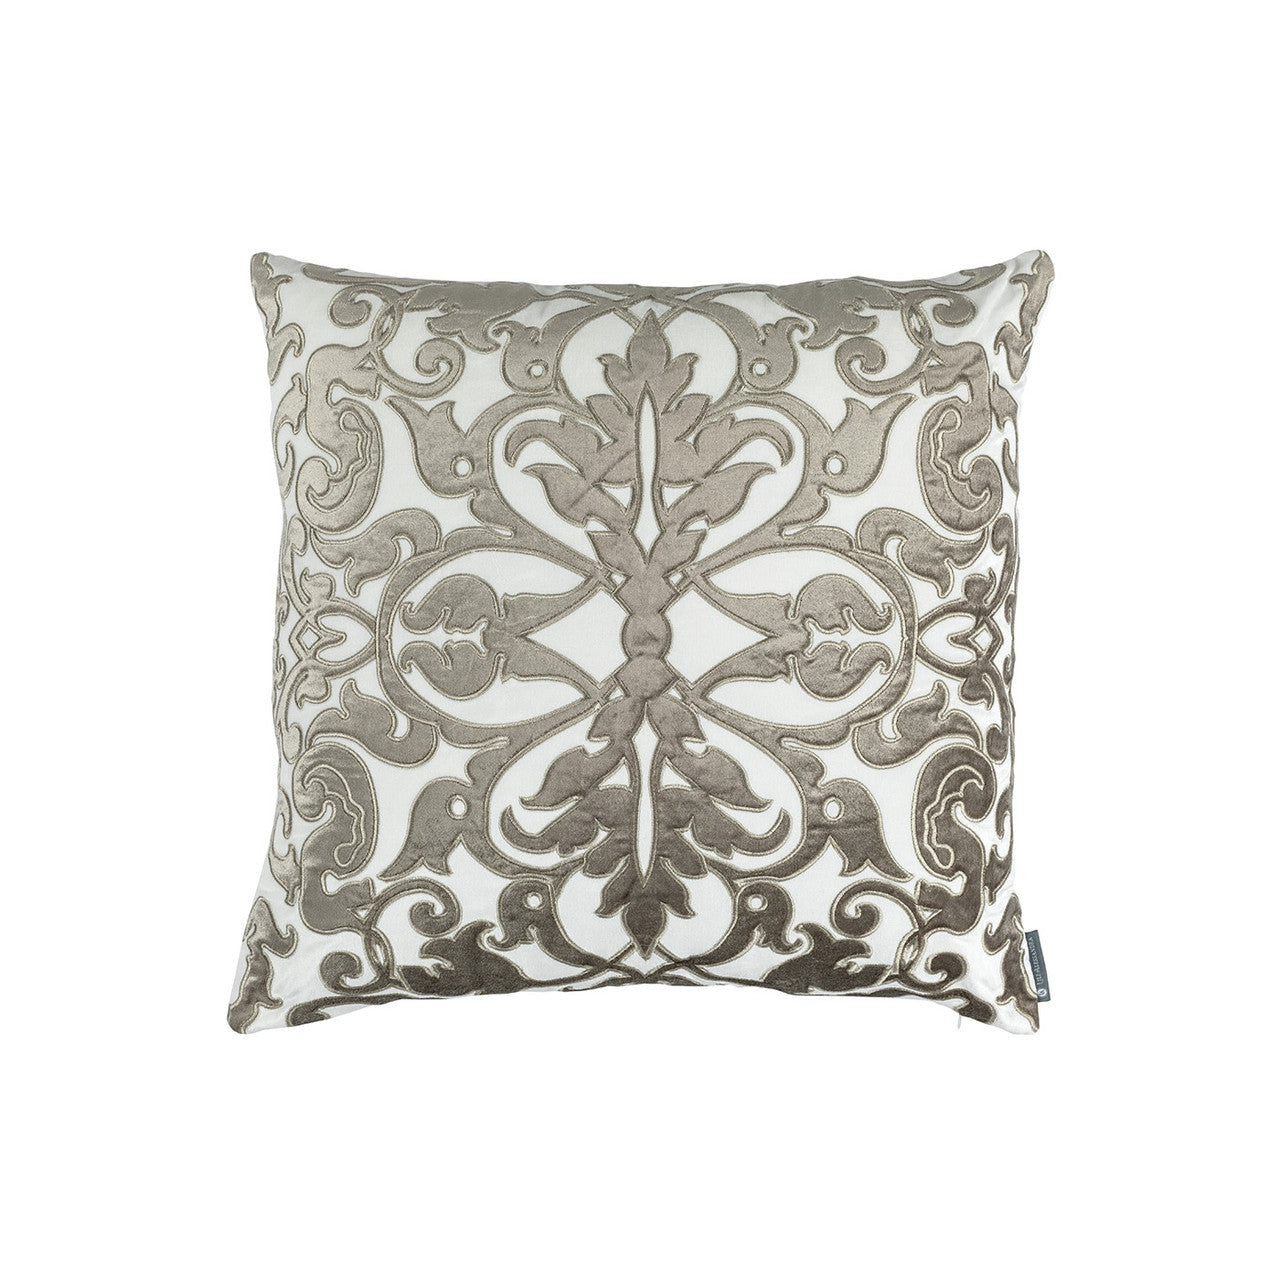 Lili Alessandra Jackie Square Pillow - Ivory/Fawn